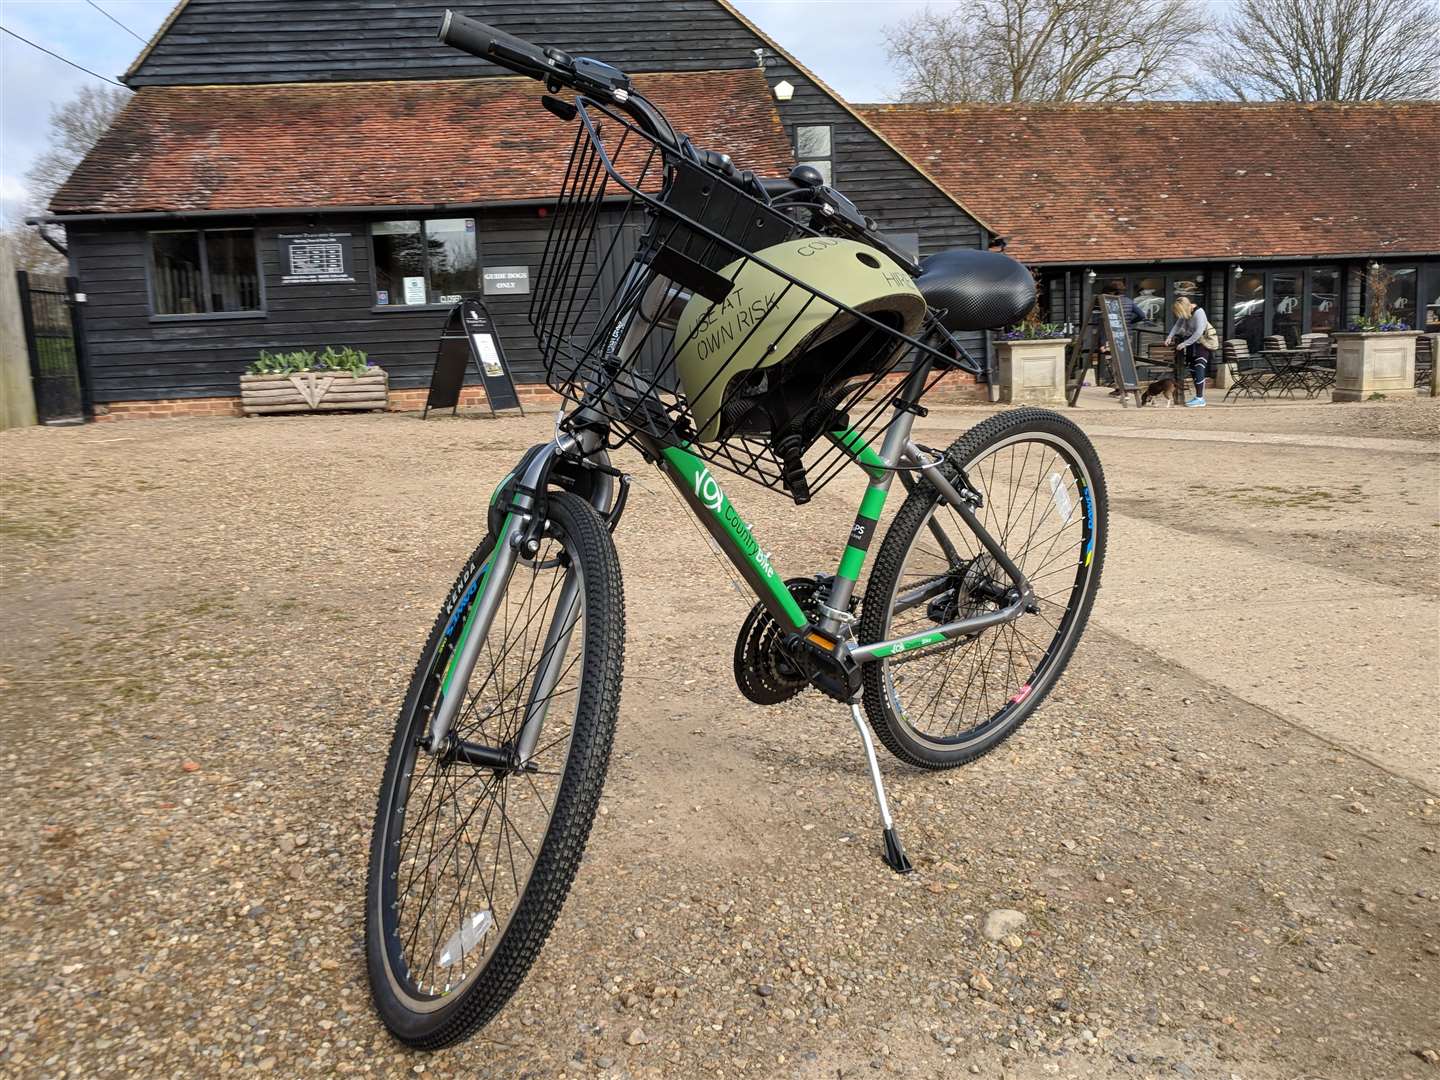 CountryBike has cycles to hire at Penshurst Place